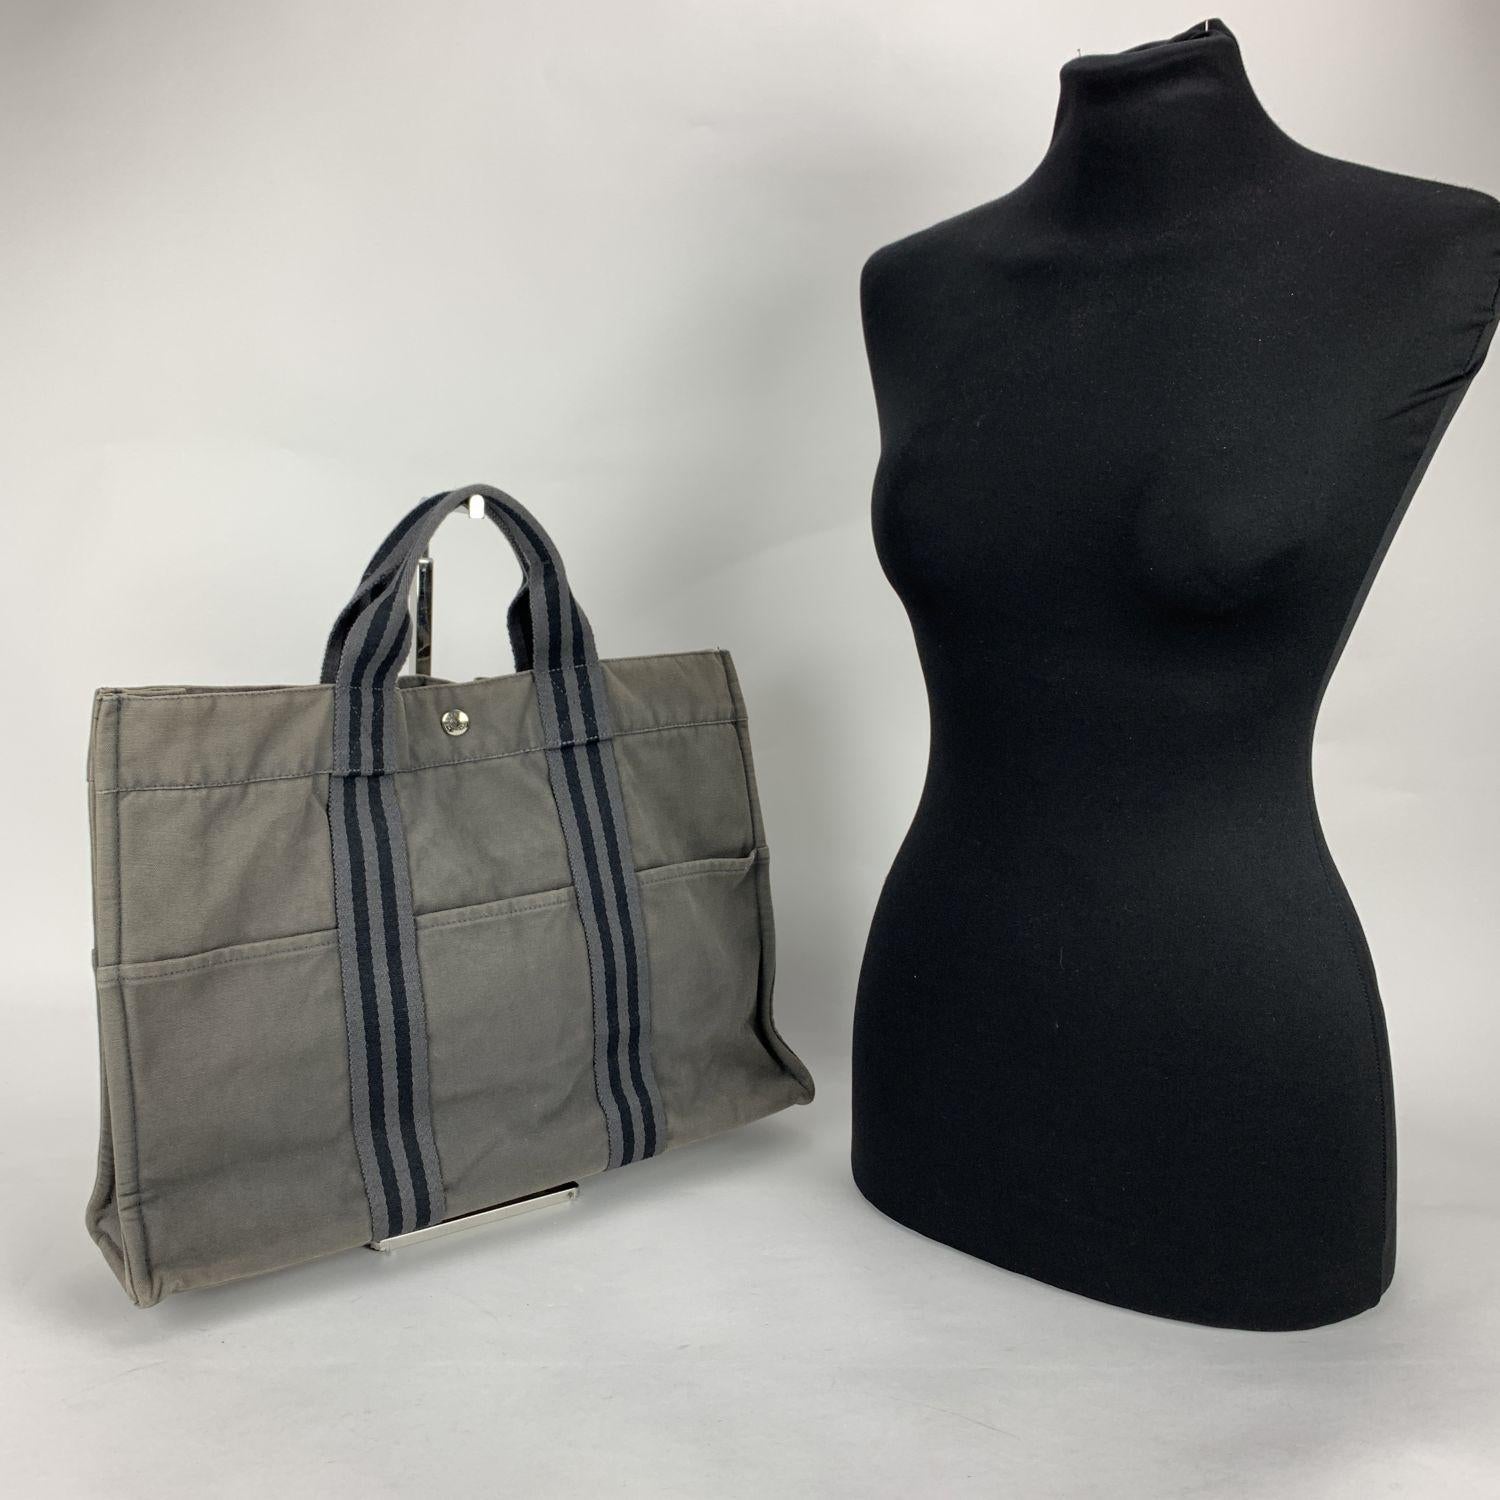 'HERMES FOURRE TOUT - MM' - Tote handbag. Made in France. Grey color with black stripes. Material: 100% cotton. It has snaps on both ends for expansion. Durable canvas handles, perfect for casual and everyday use. 3 open pockets on the front and 3